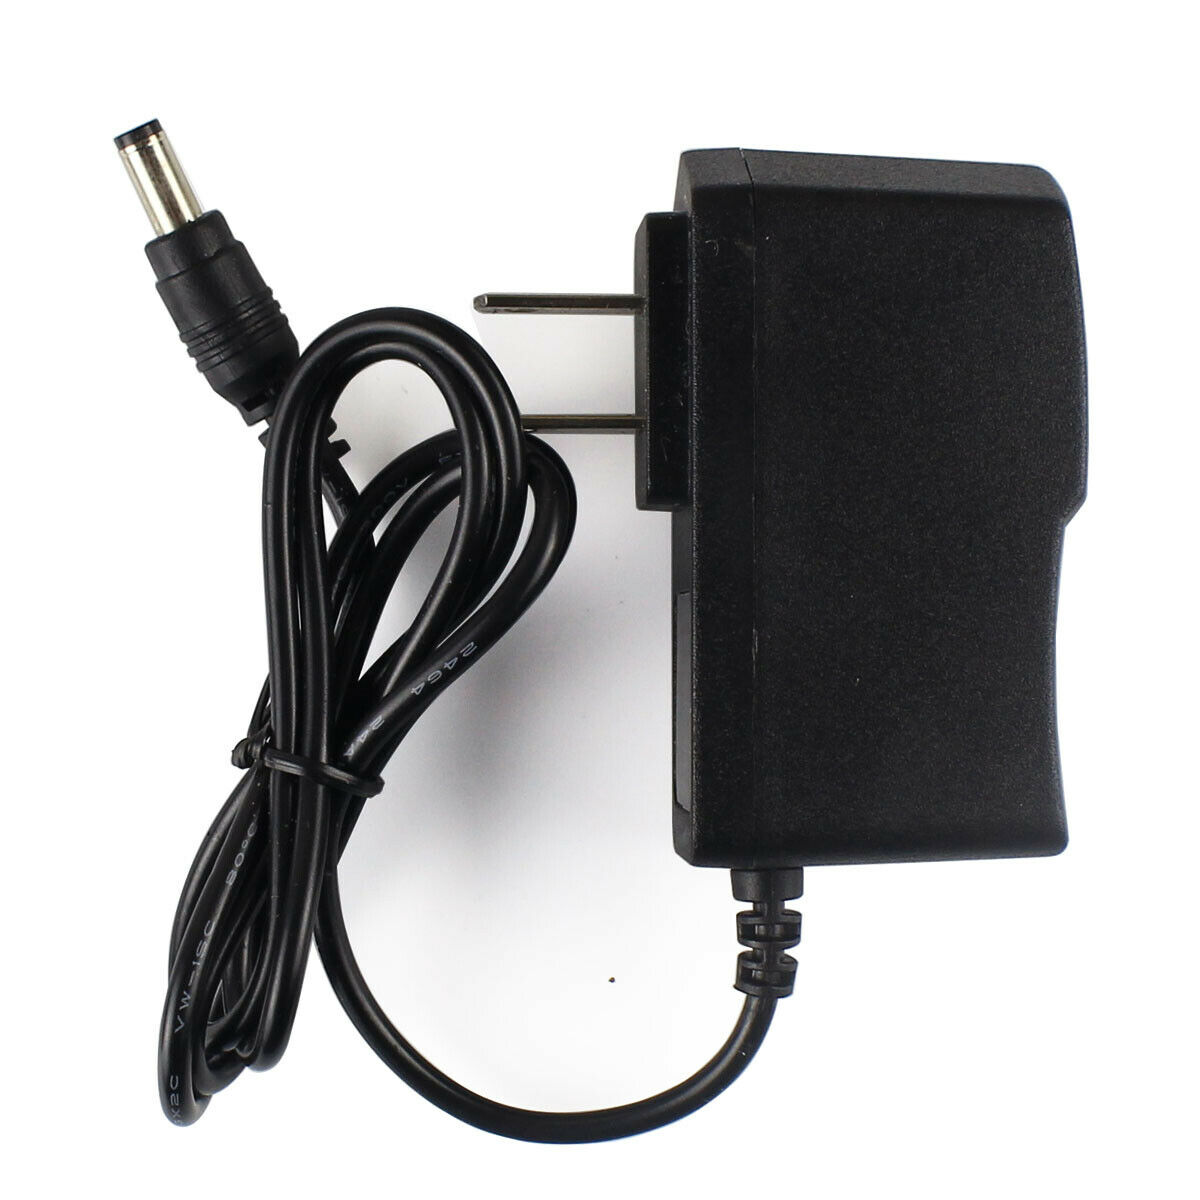 NEW AC Adapter For Metrologic Honeywell 3A-052WP05 P/N: 00-06324 DC Power Supply Brand: Unbranded Type: Adapter Out - Click Image to Close